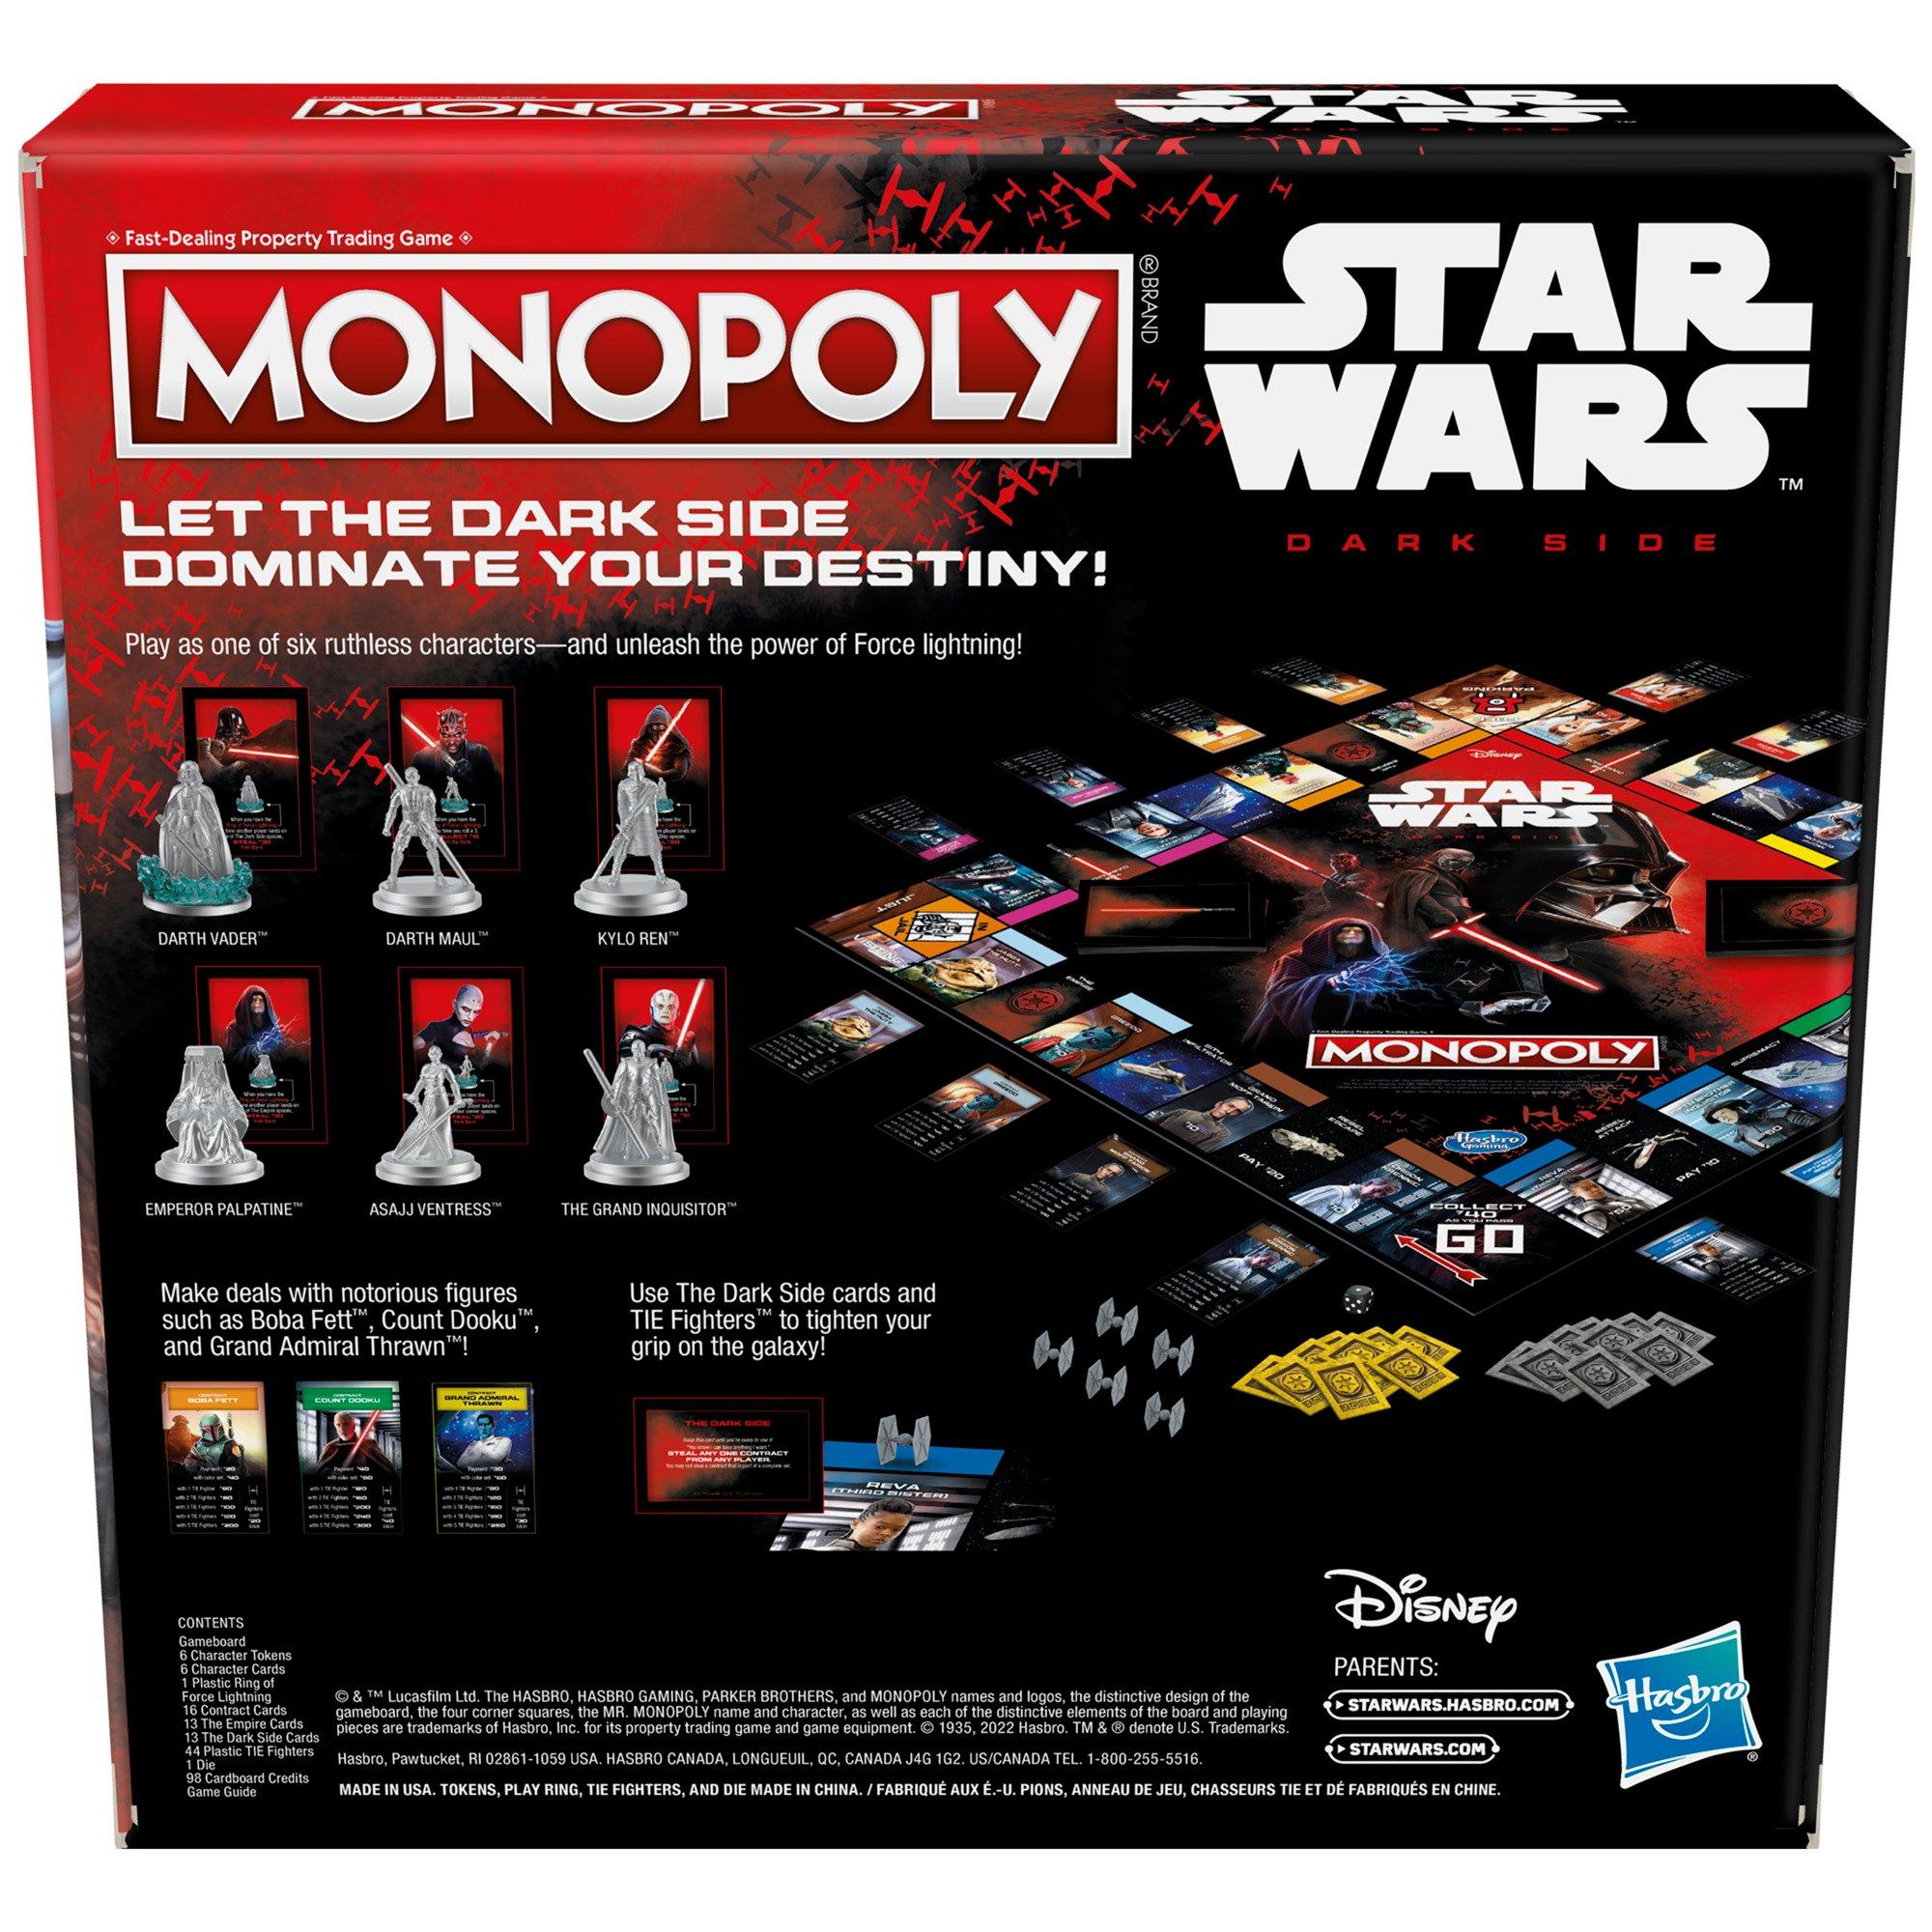 Monopoly Disney Edition Board And Instruction Manual